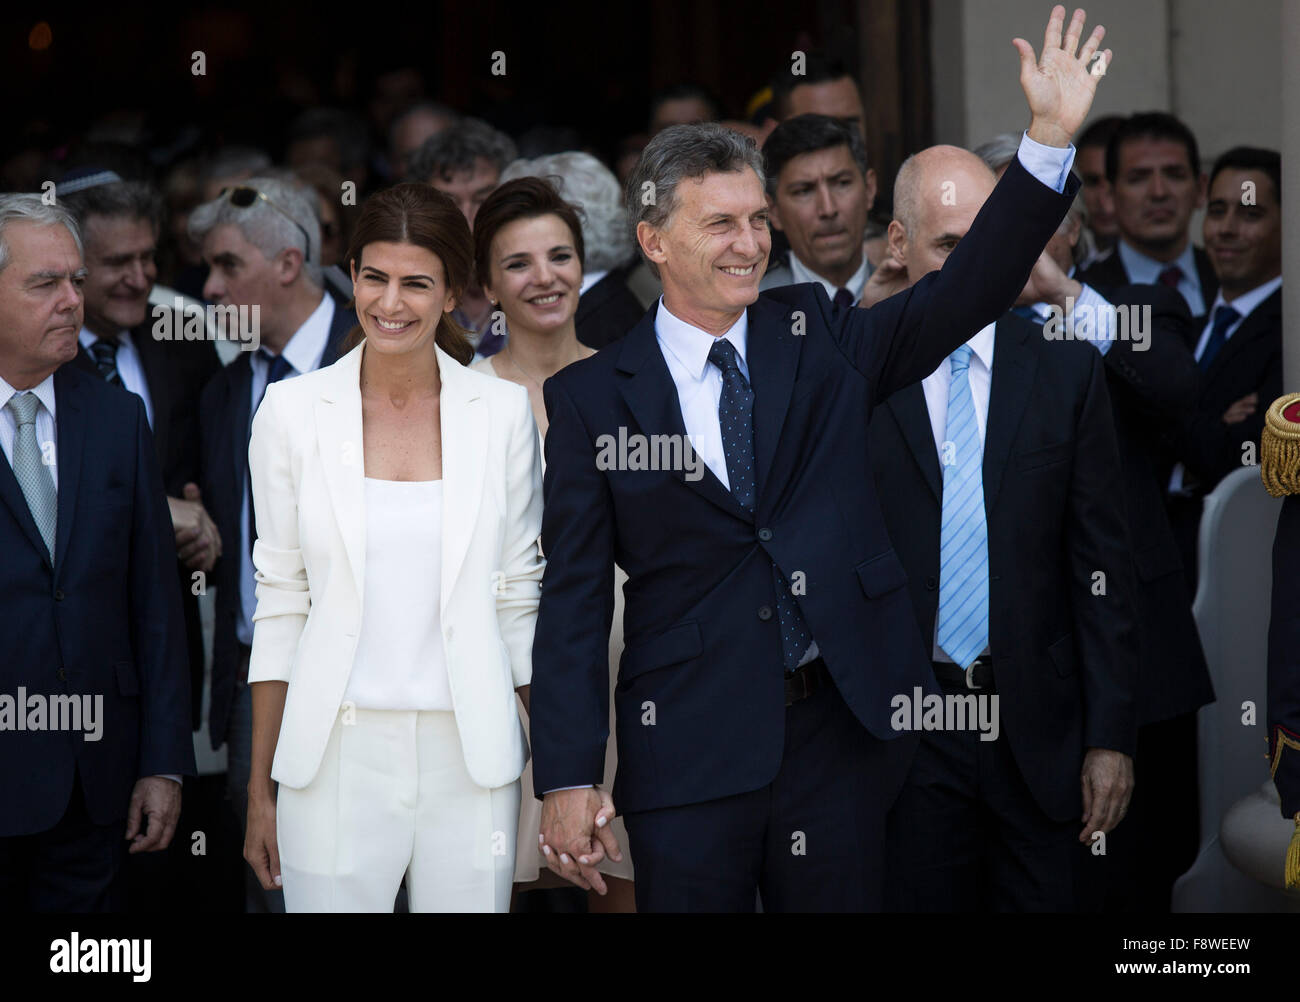 Buenos Aires, Argentina. 11th Dec, 2015. Argentina's President Mauricio Macri (R Front) leaves with First Lady Juliana Awada (2nd L) after taking part in the Tedeum at the Metropolitan Cathedral in Buenos Aires, capital of Argentina, Dec. 11, 2015. According to local press, Mauricio Macri attended Friday with Argentina's Vice President Gabriela Michetti and his Cabinet the traditional religious service at the Metropolital Cathedral, one day after his pesidential inauguration. Credit:  Martin Zabala/Xinhua/Alamy Live News Stock Photo